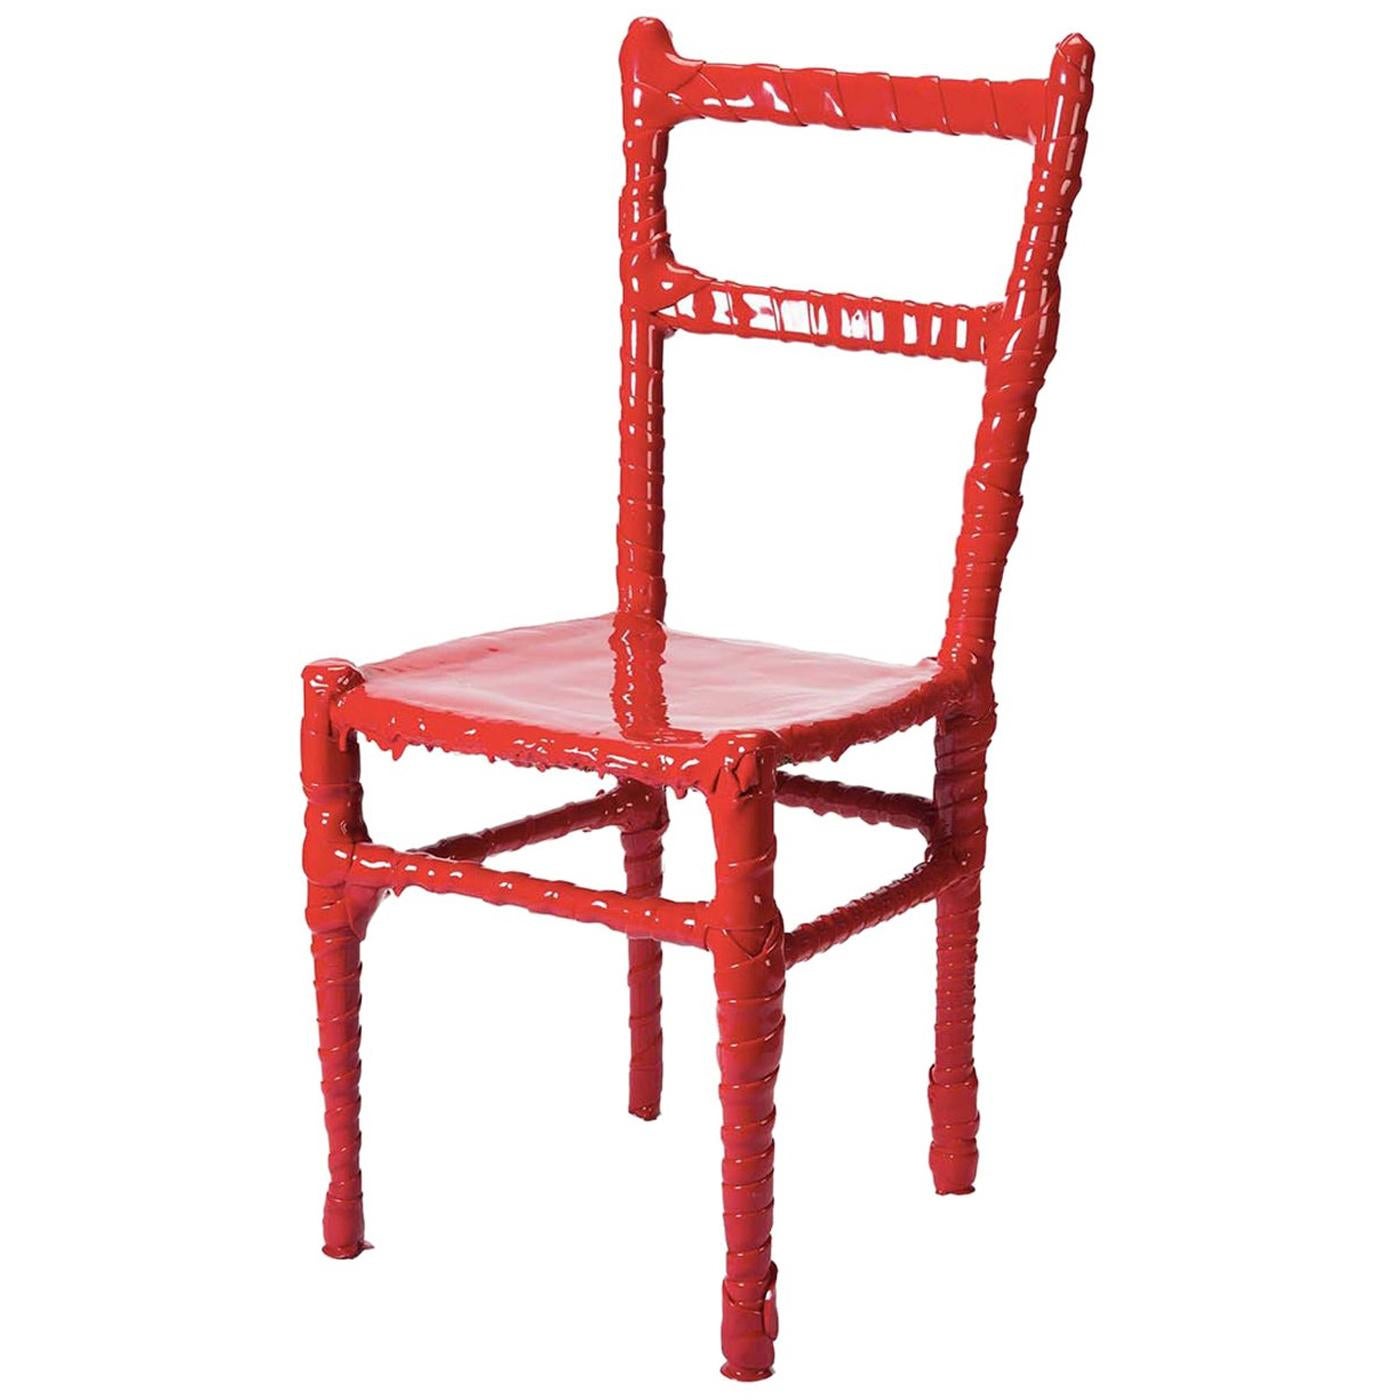 N. 03/20 One-Off Chair by Paola Navone